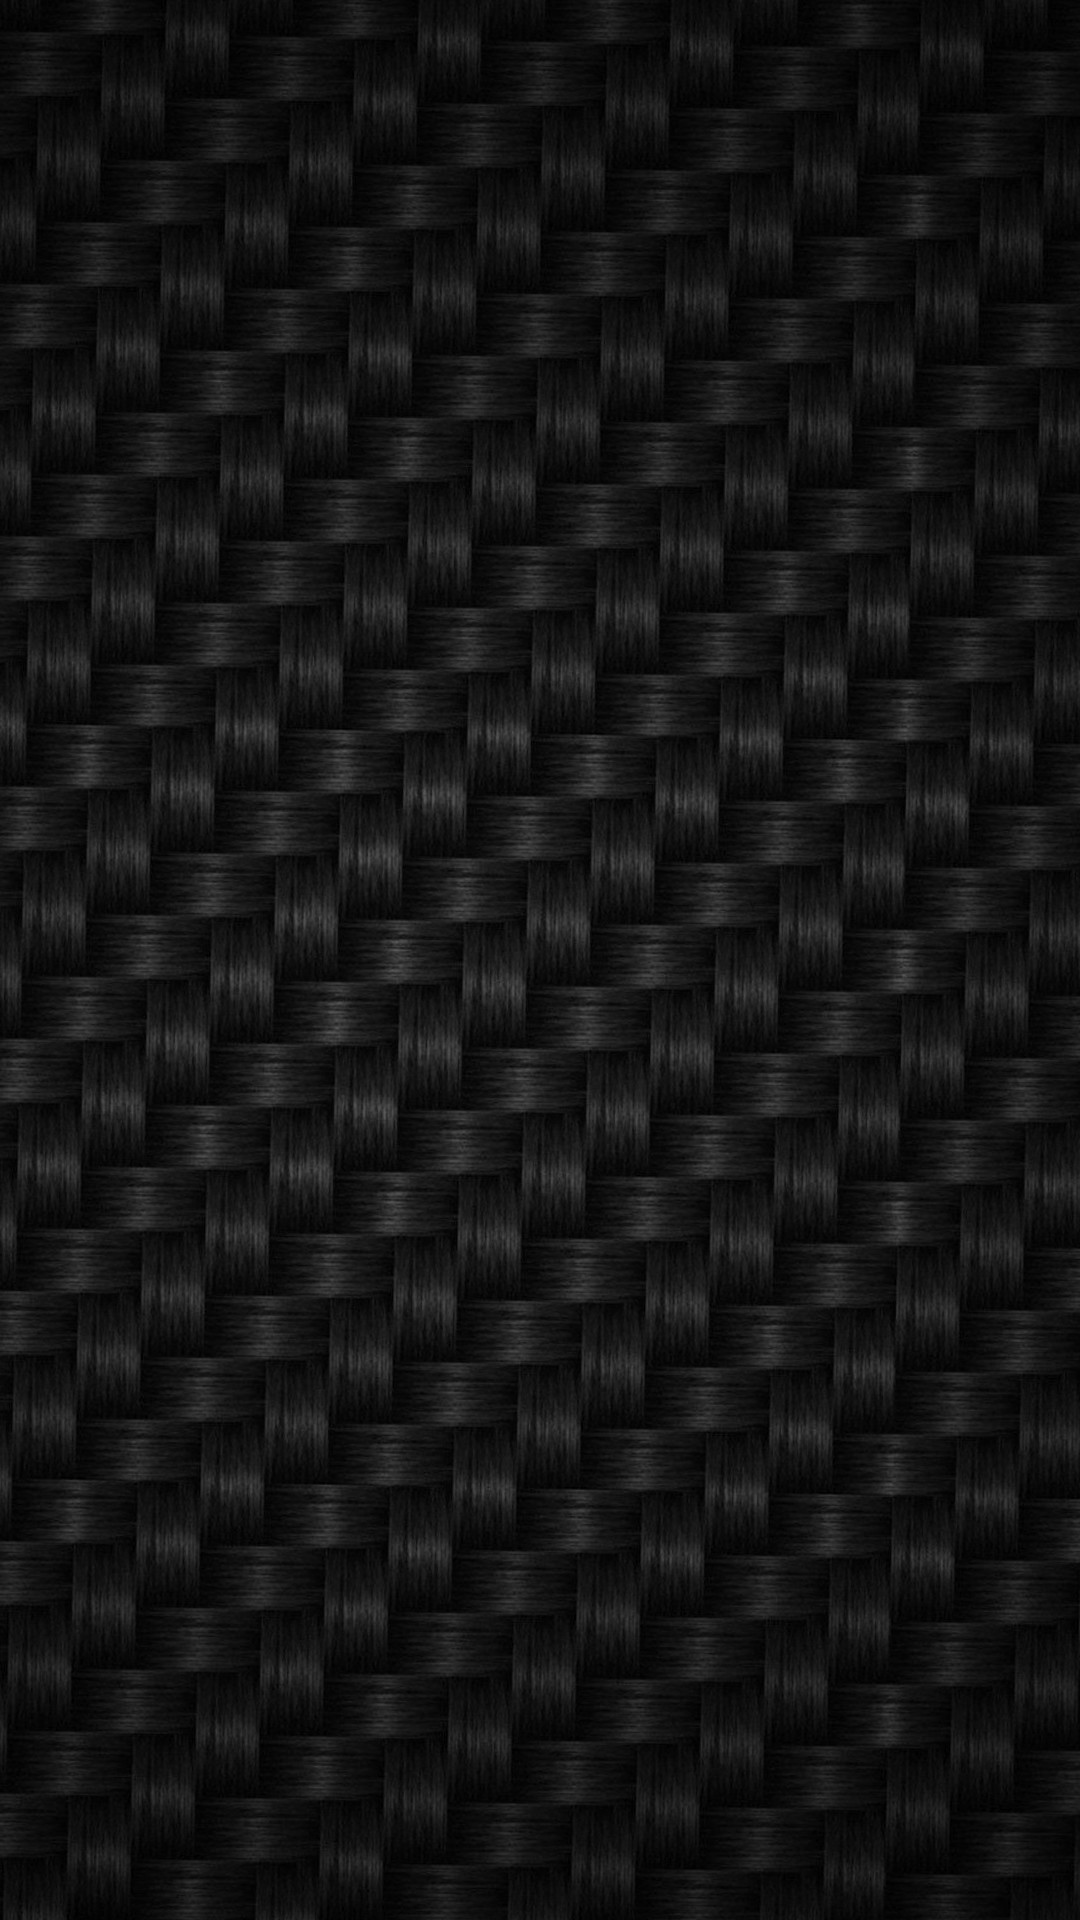 1080x1920 Title : carbon fiber wallpaper android collection (56+). Dimension : 1080 x  1920. File Type : JPG/JPEG